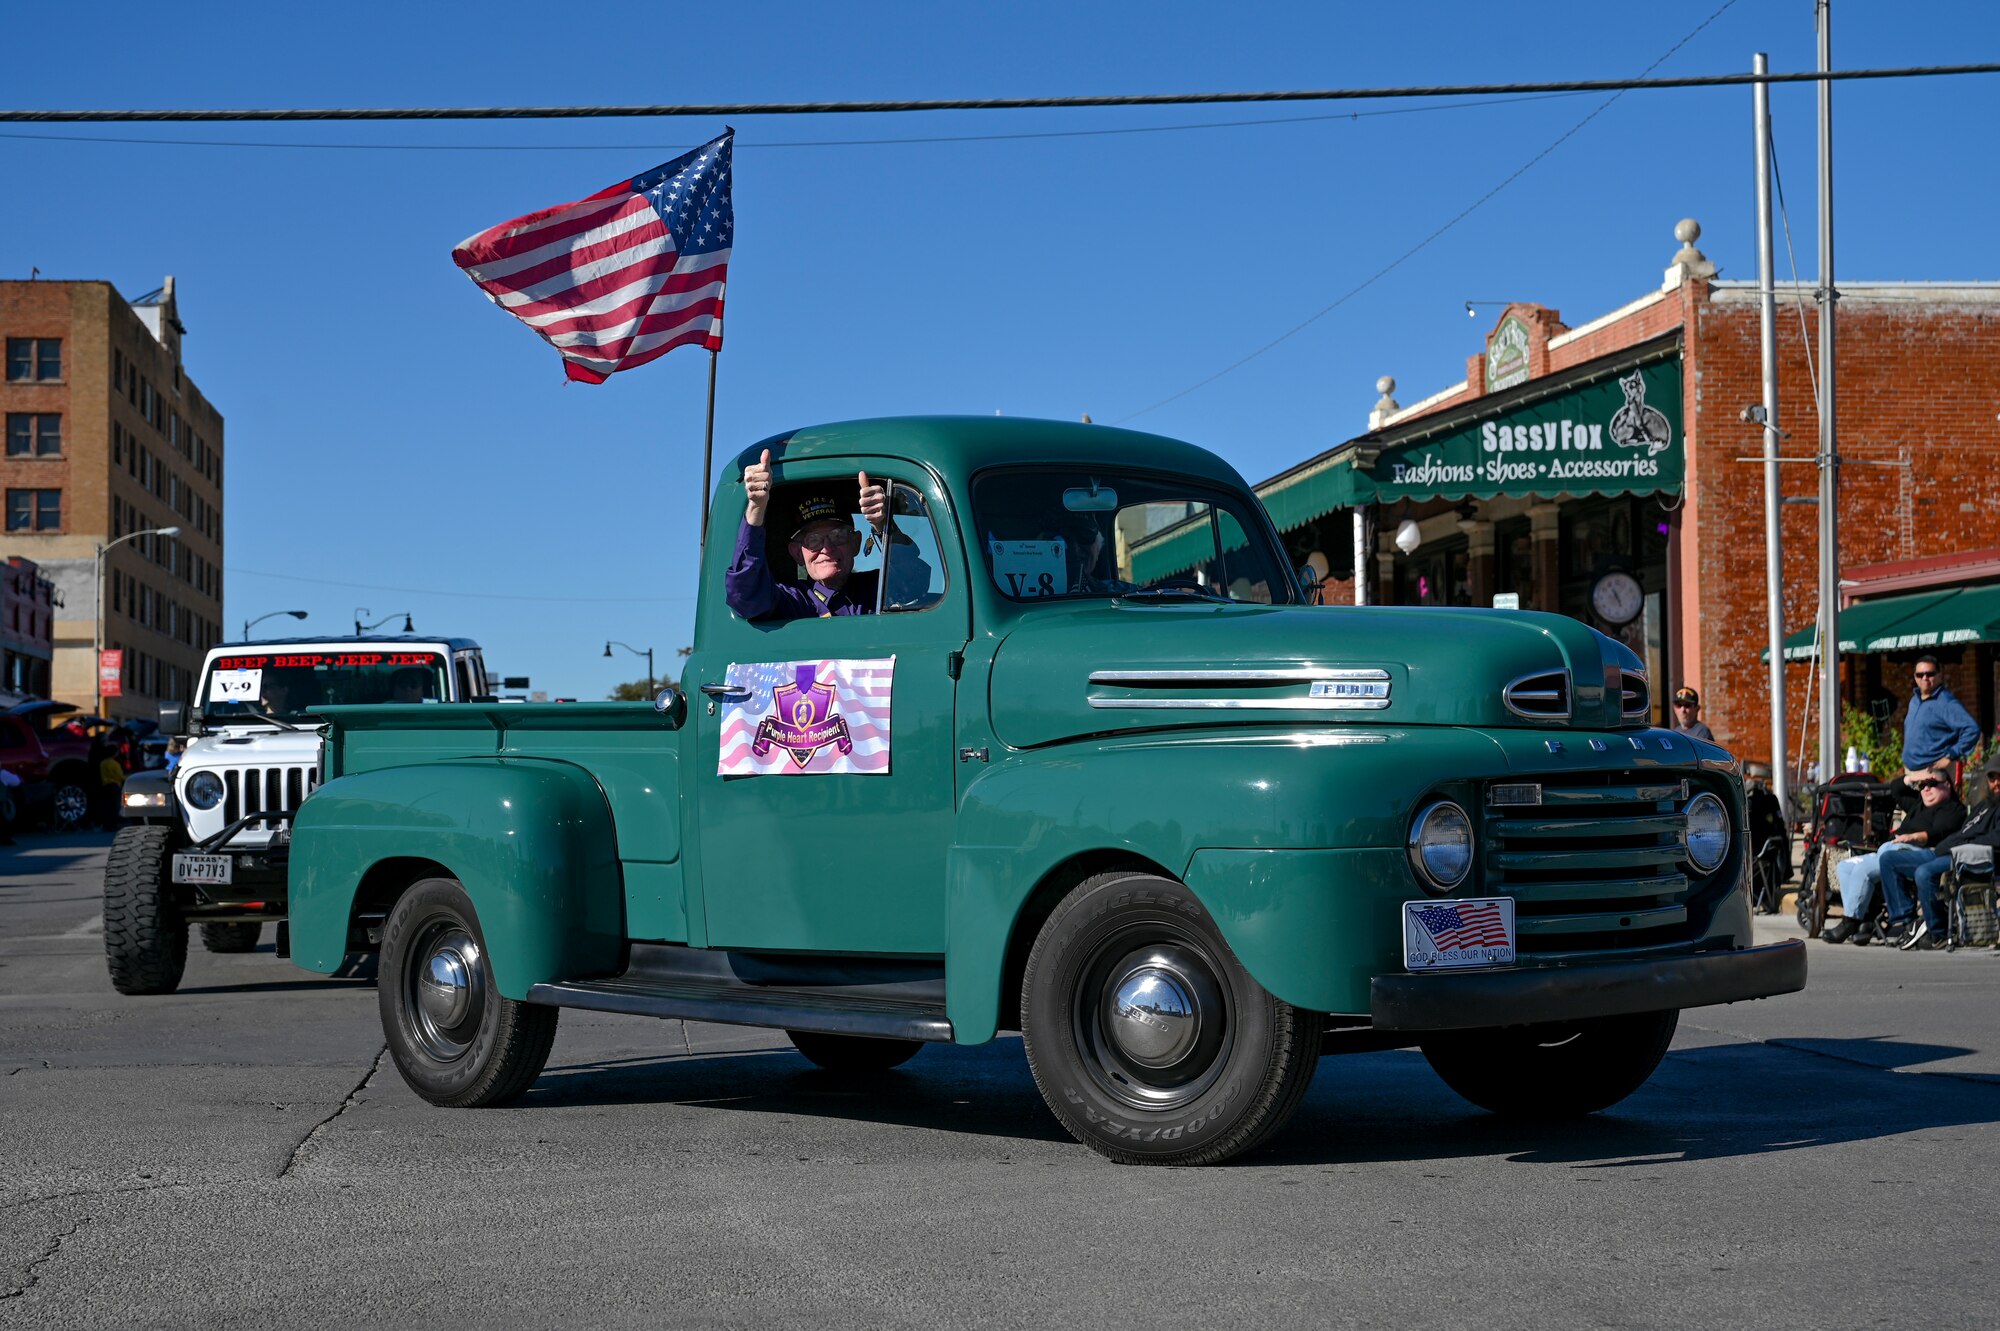 A WWII veteran poses in his truck during the San Angelo All Veterans Council Veterans Day parade downtown, San Angelo, Texas, Nov. 5, 2022. The Parade featured Veterans from every armed conflict dating back to WWII. (U.S. Air Force photo by Senior Airman Michael Bowman)